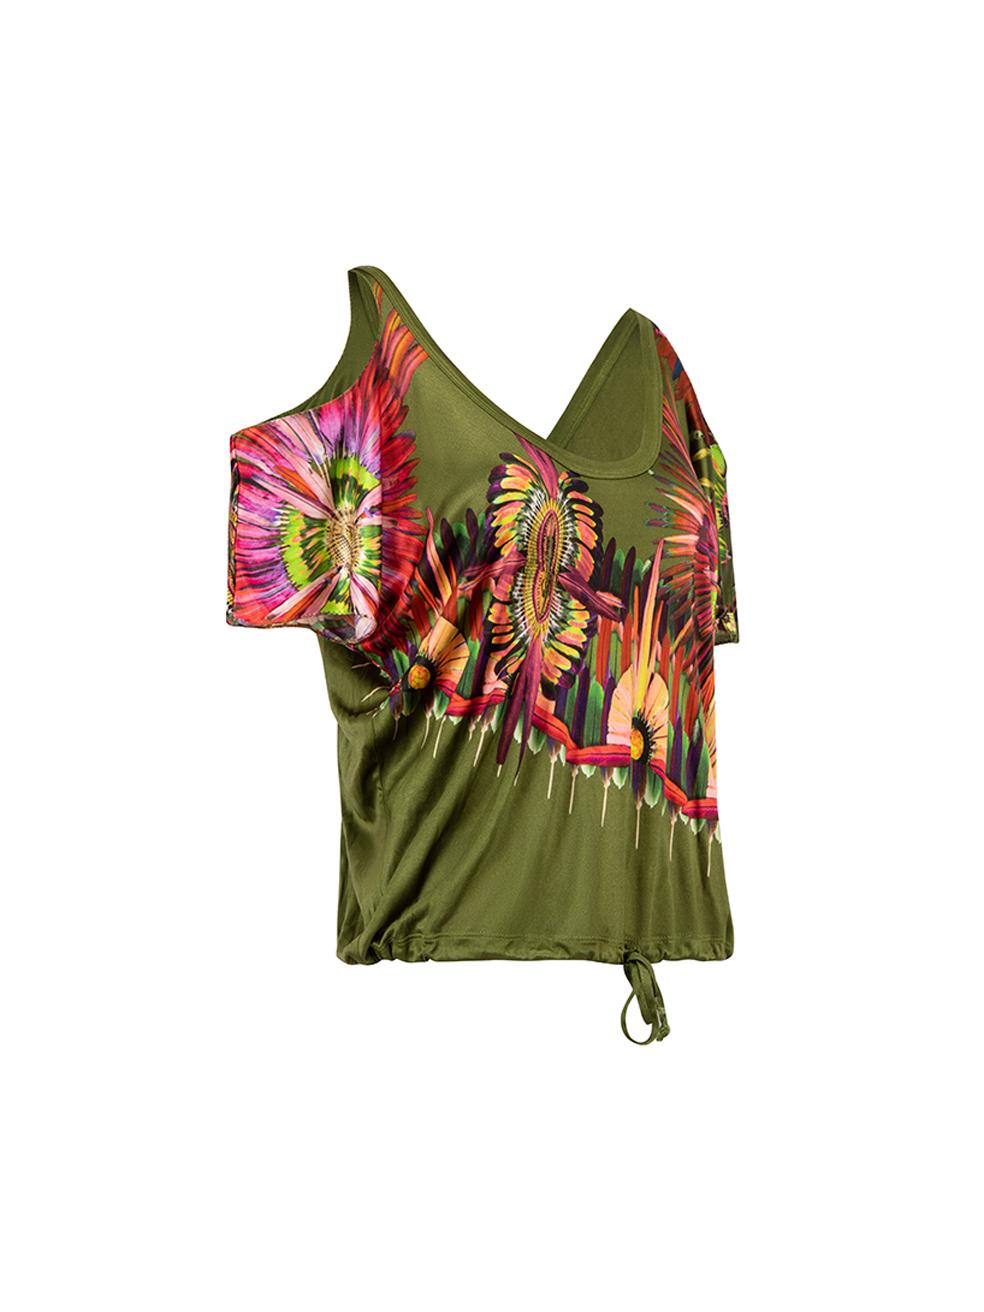 CONDITION is Very good. Hardly any visible wear to top is evident. There is loose thread at the bottom of the string on this used Jean Paul Gaultier Soleil designer resale item. 
 
 Details
  Green
 Viscose
 Floral printed top
 Scoop neckline
 Cold